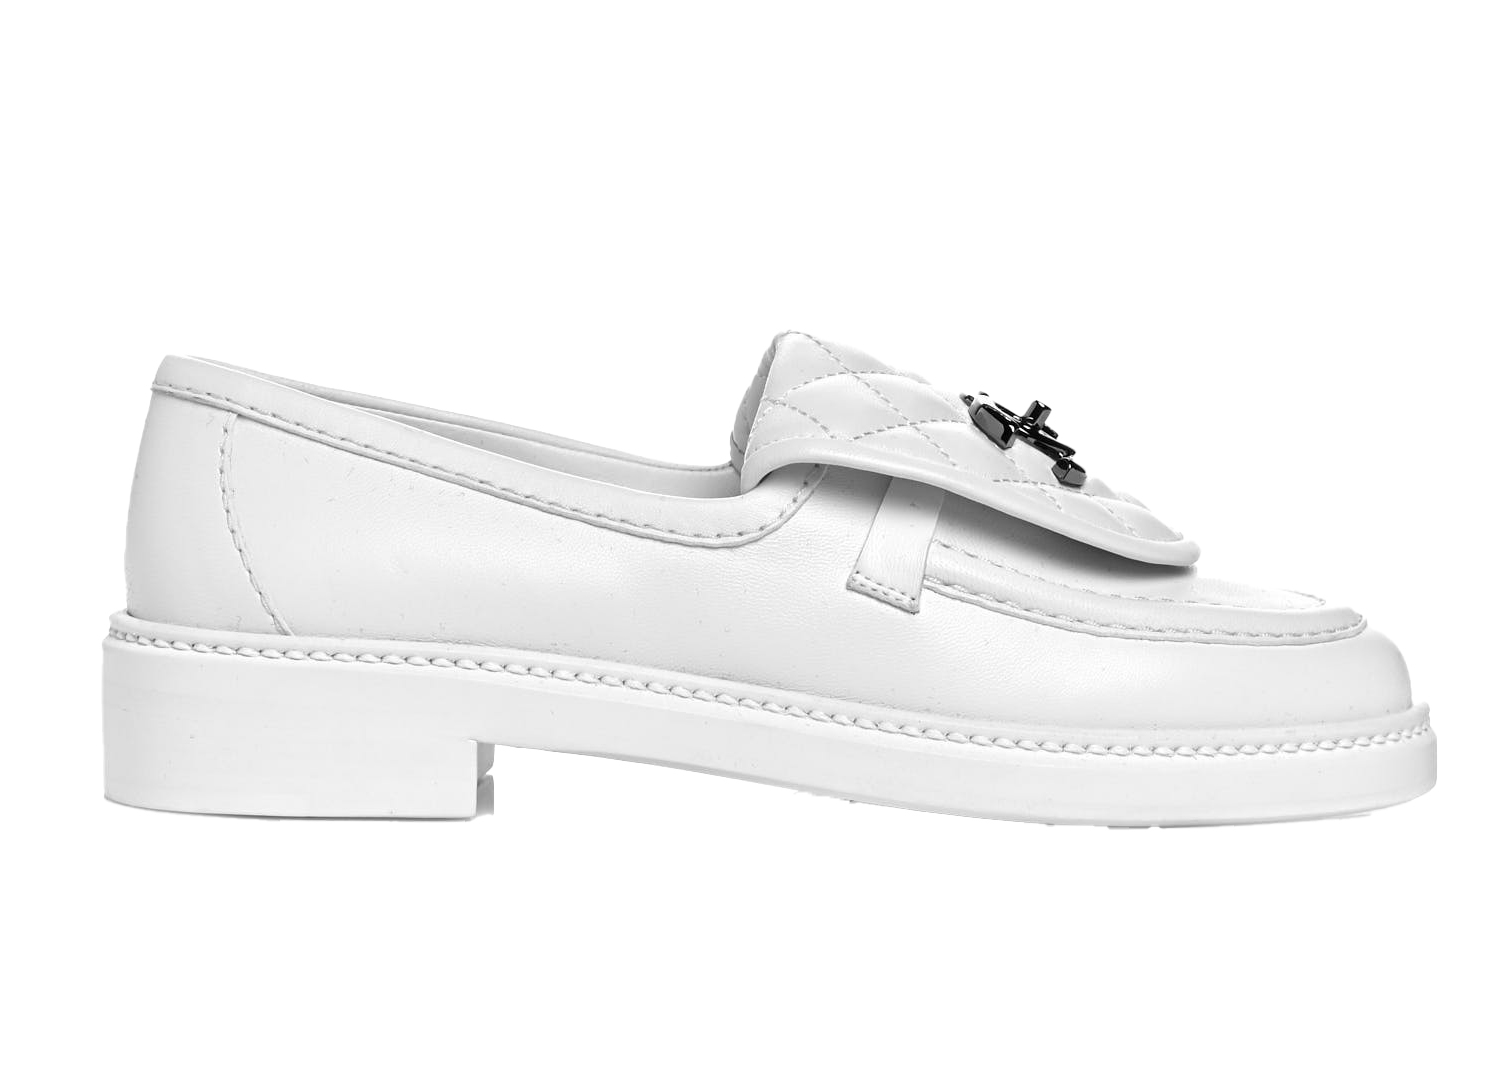 Chanel loafers white patent size 42 calfskin 2021 Limited edition  eBay